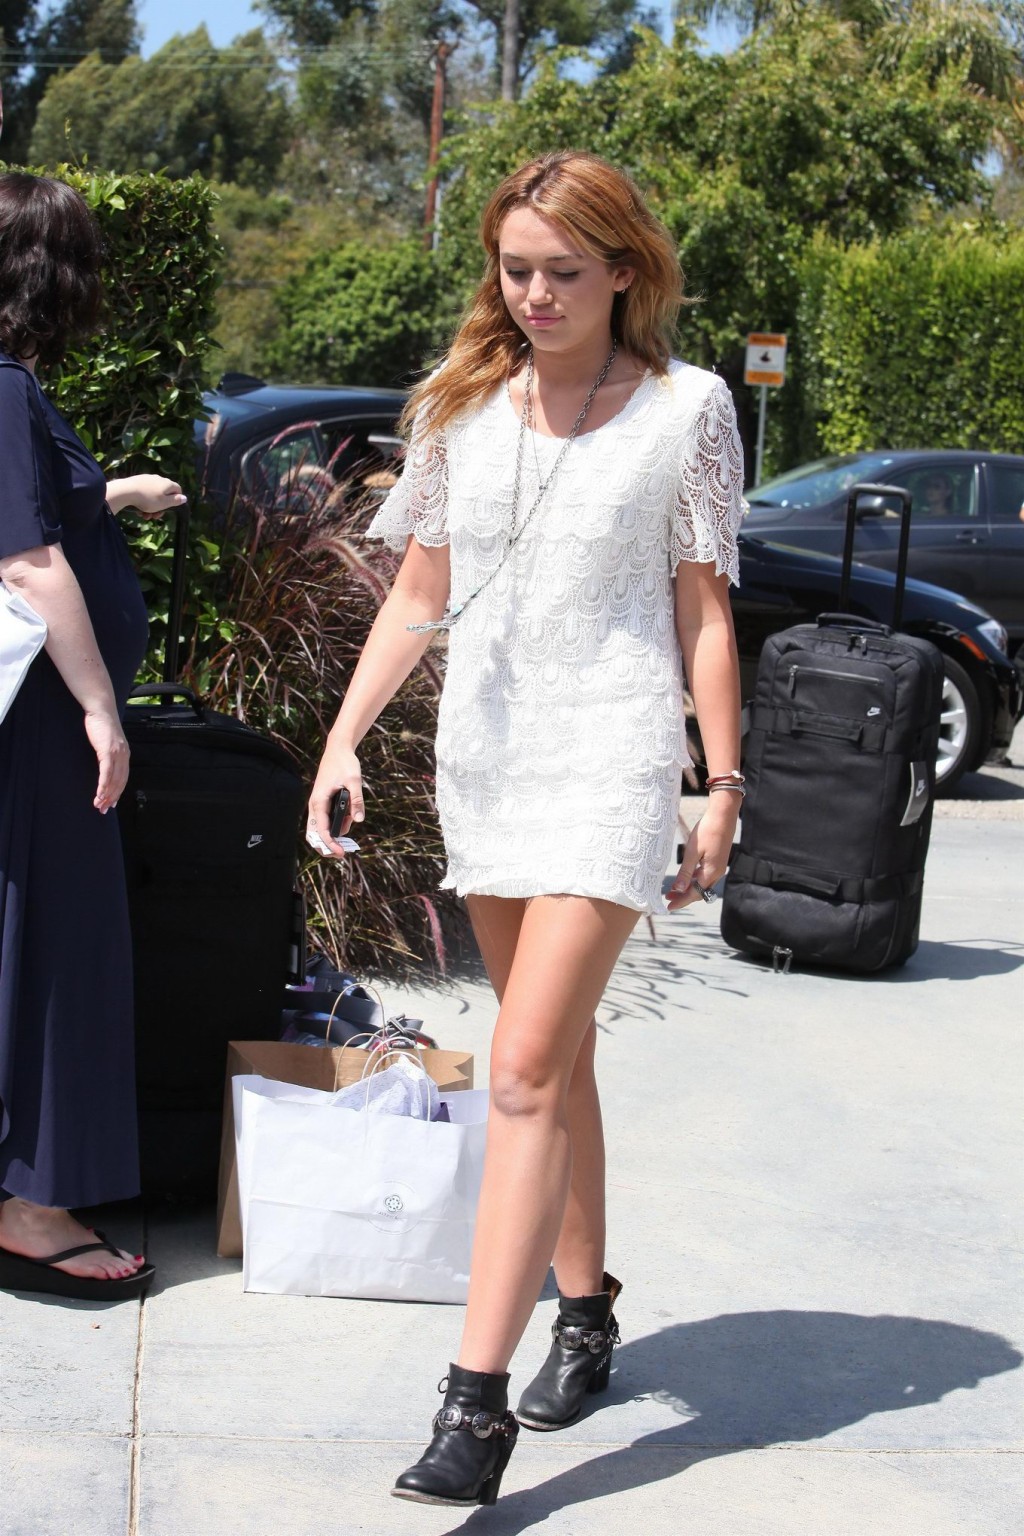 Miley Cyrus leggy wearing white mini dress at the house party #75289831